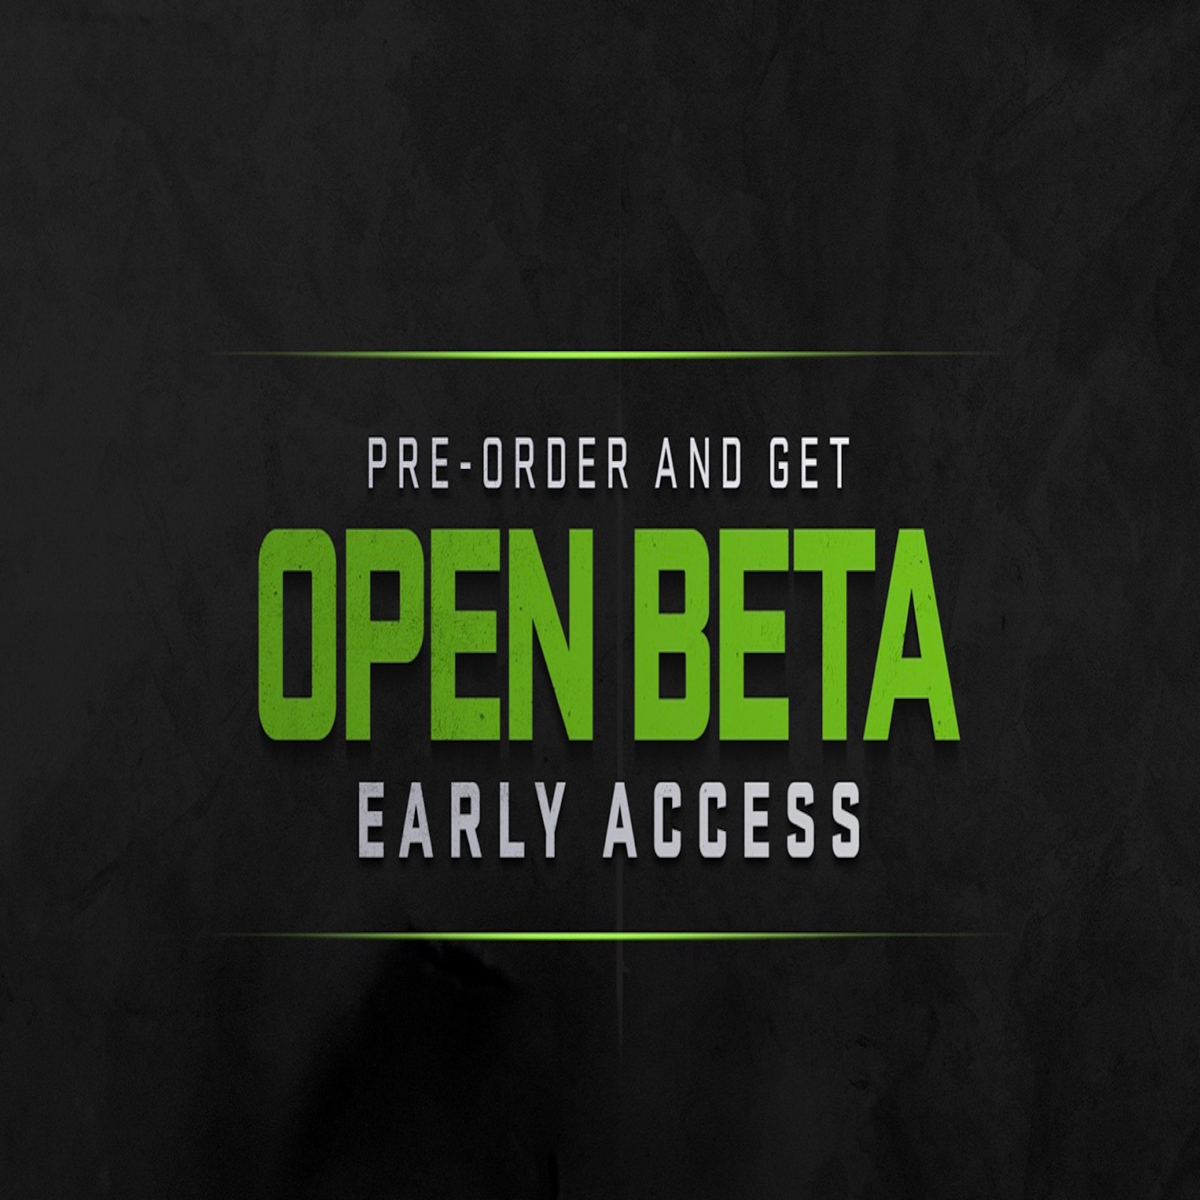 Call of Duty Modern Warfare 2: How to Access the Open Beta - IGN